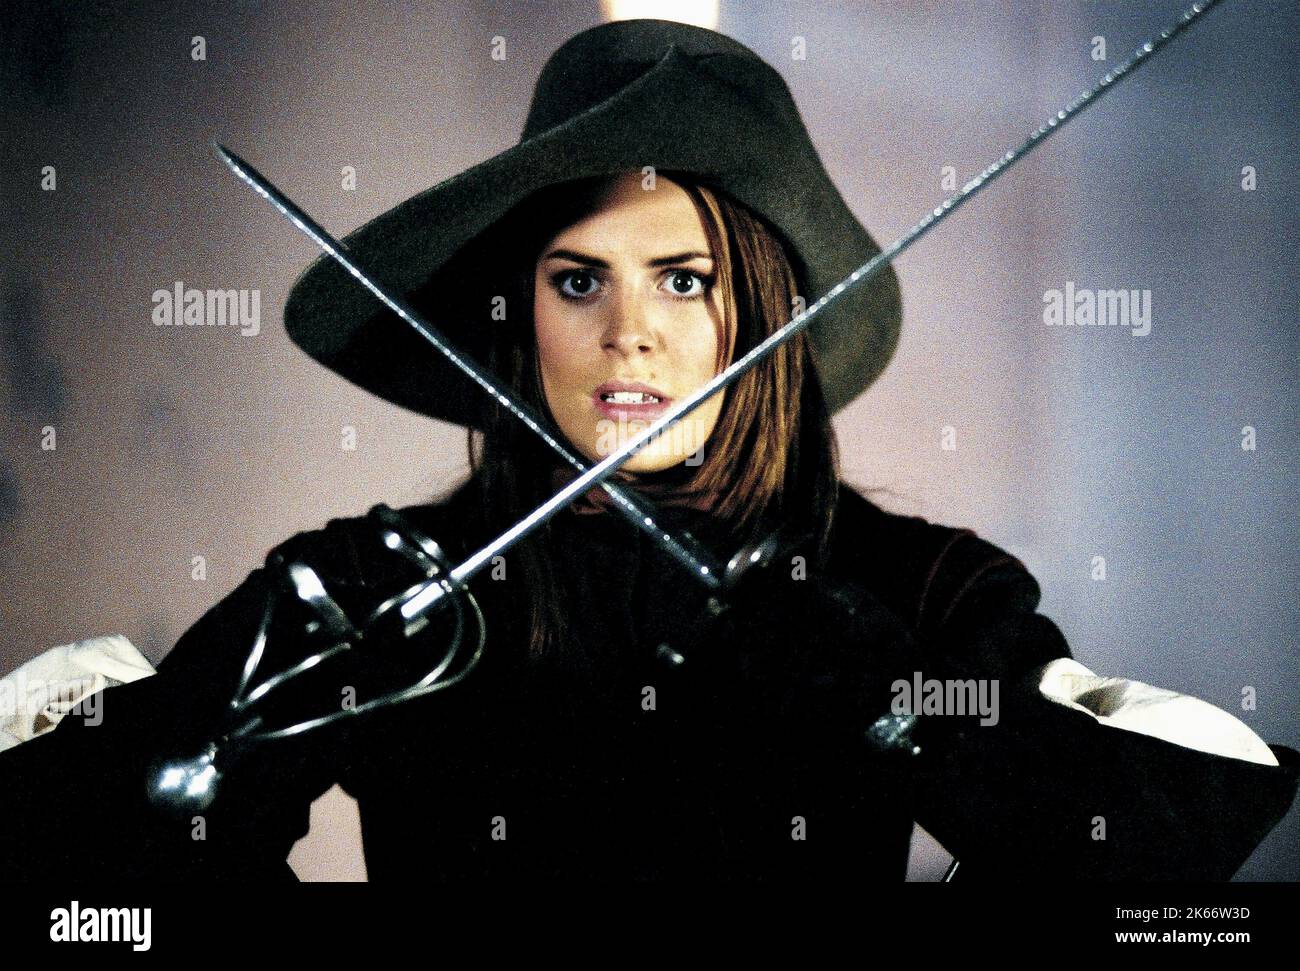 SUSIE AMY, LE FEMME MUSKETEER, 2003 Foto Stock